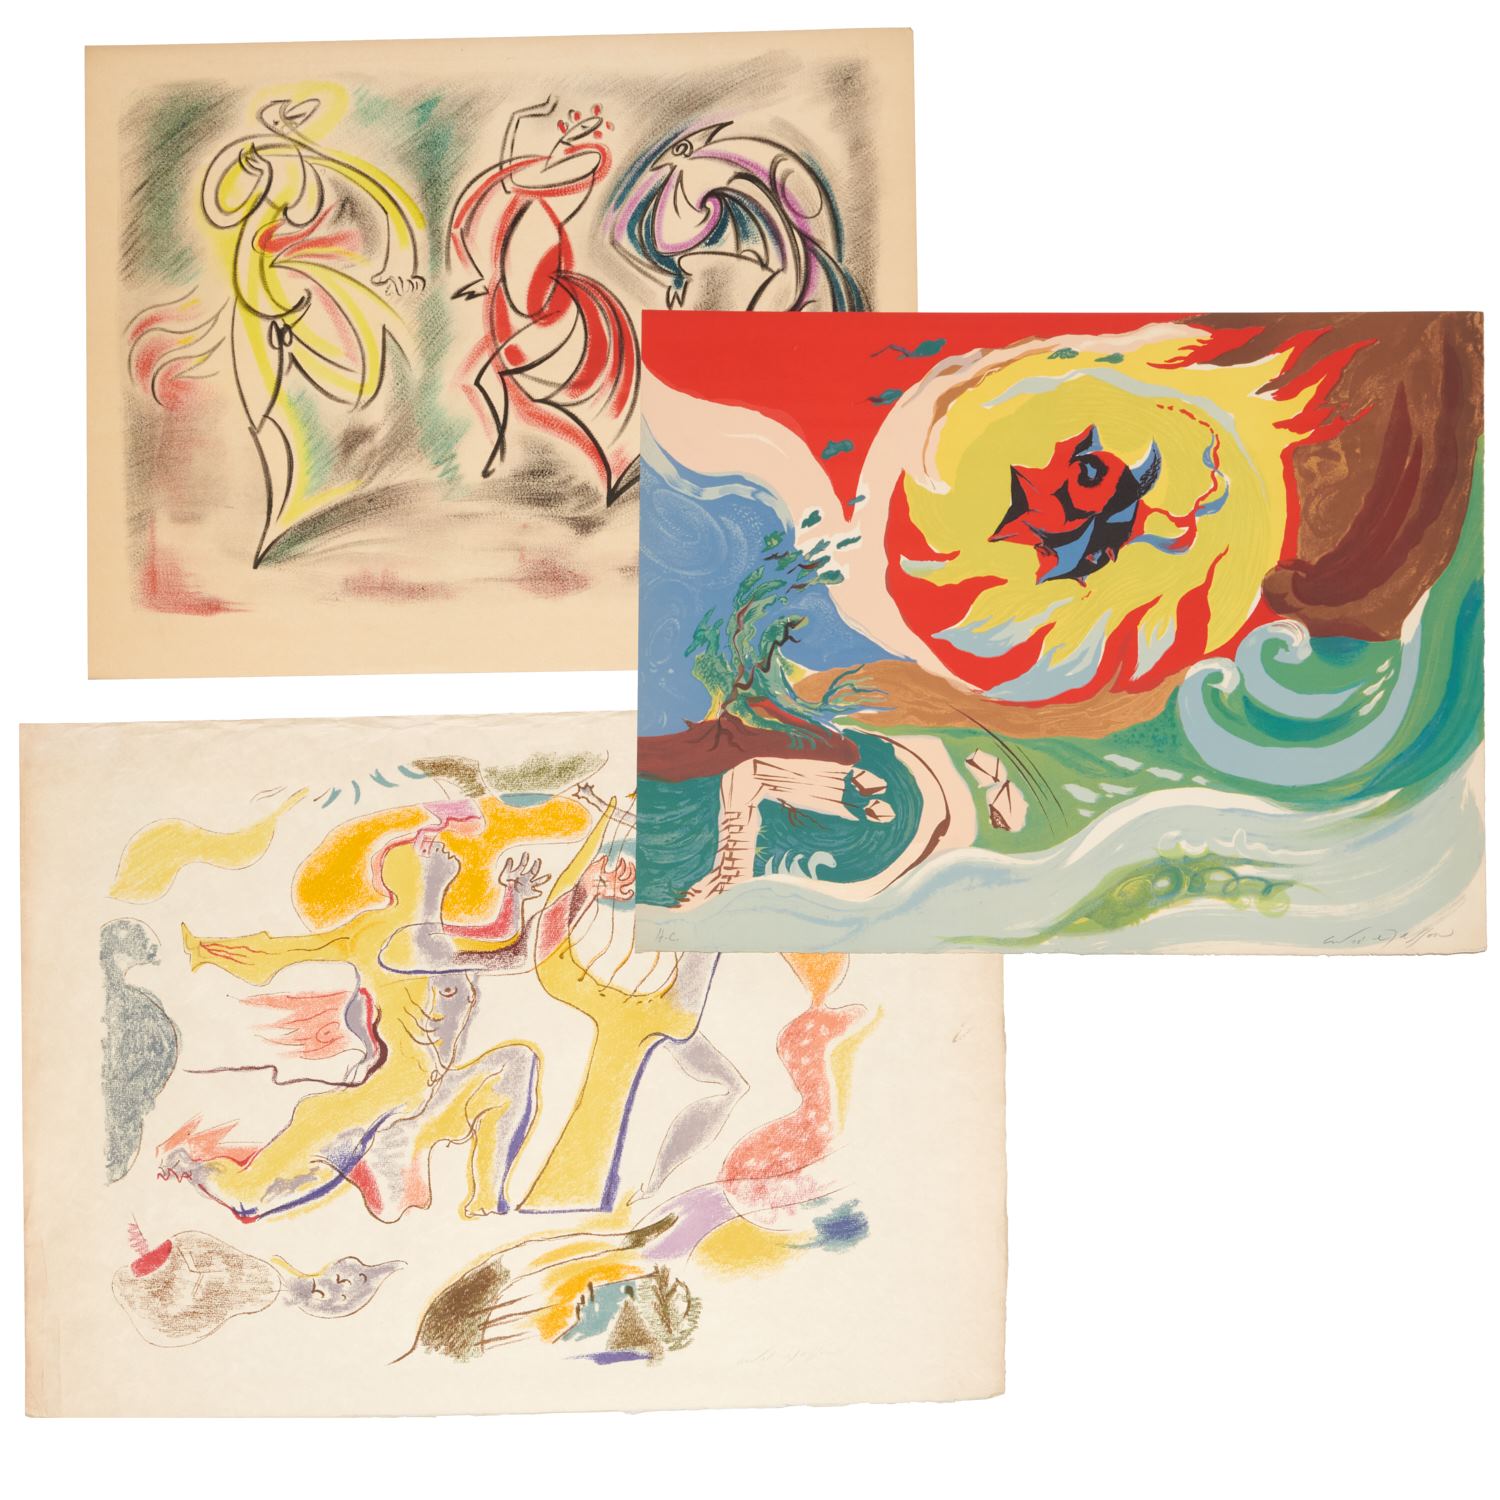 ANDRE MASSON, (3) LITHOGRAPHS IN